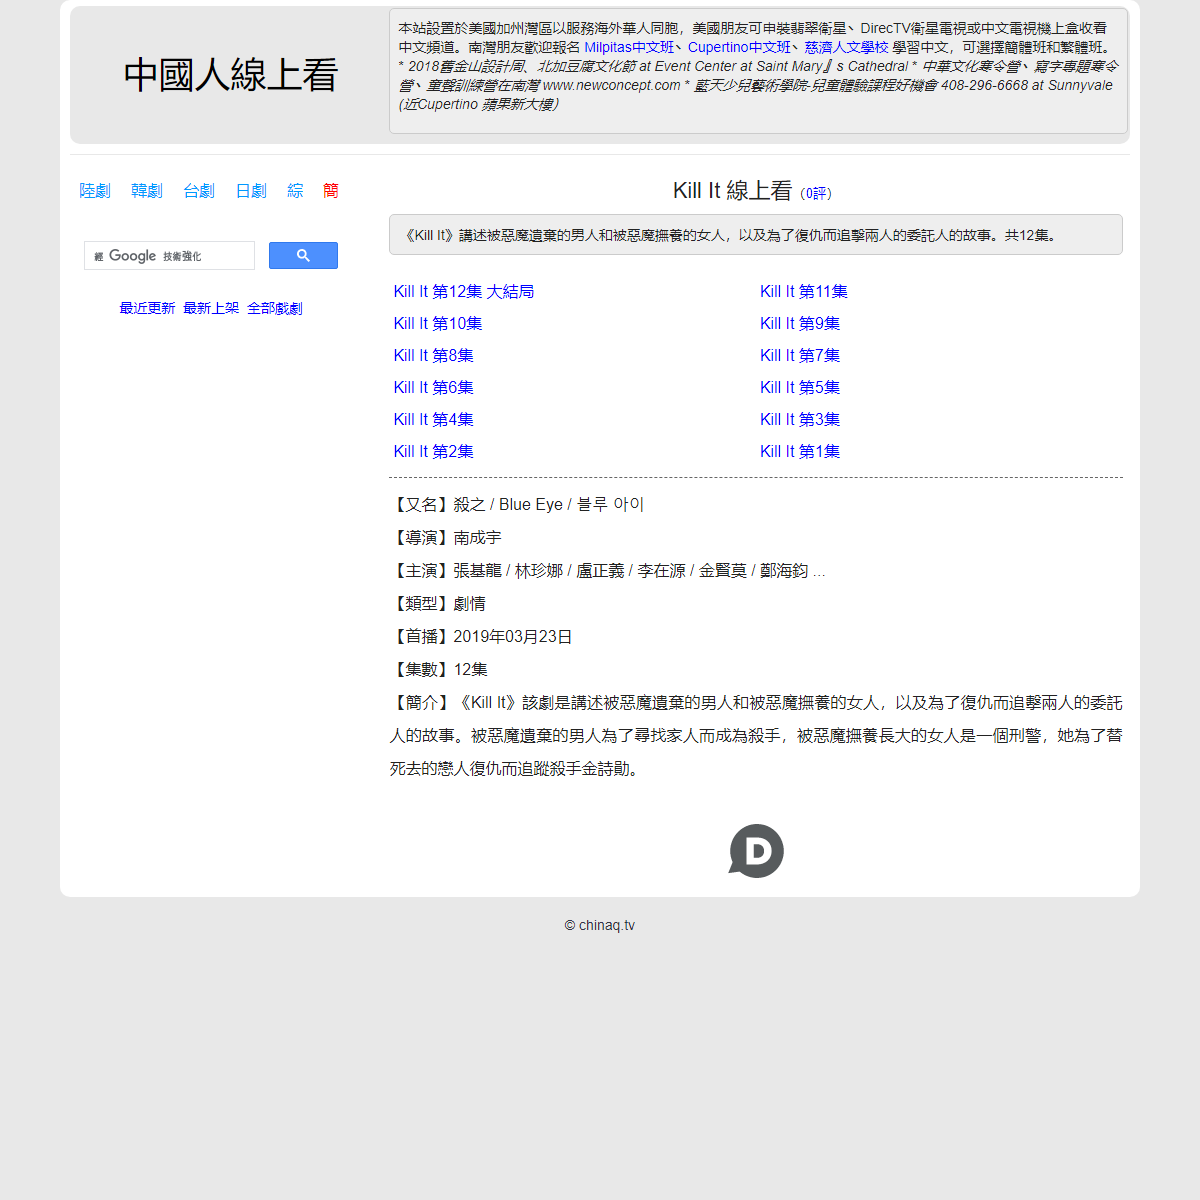 A complete backup of https://chinaq.tv/kr190323c/